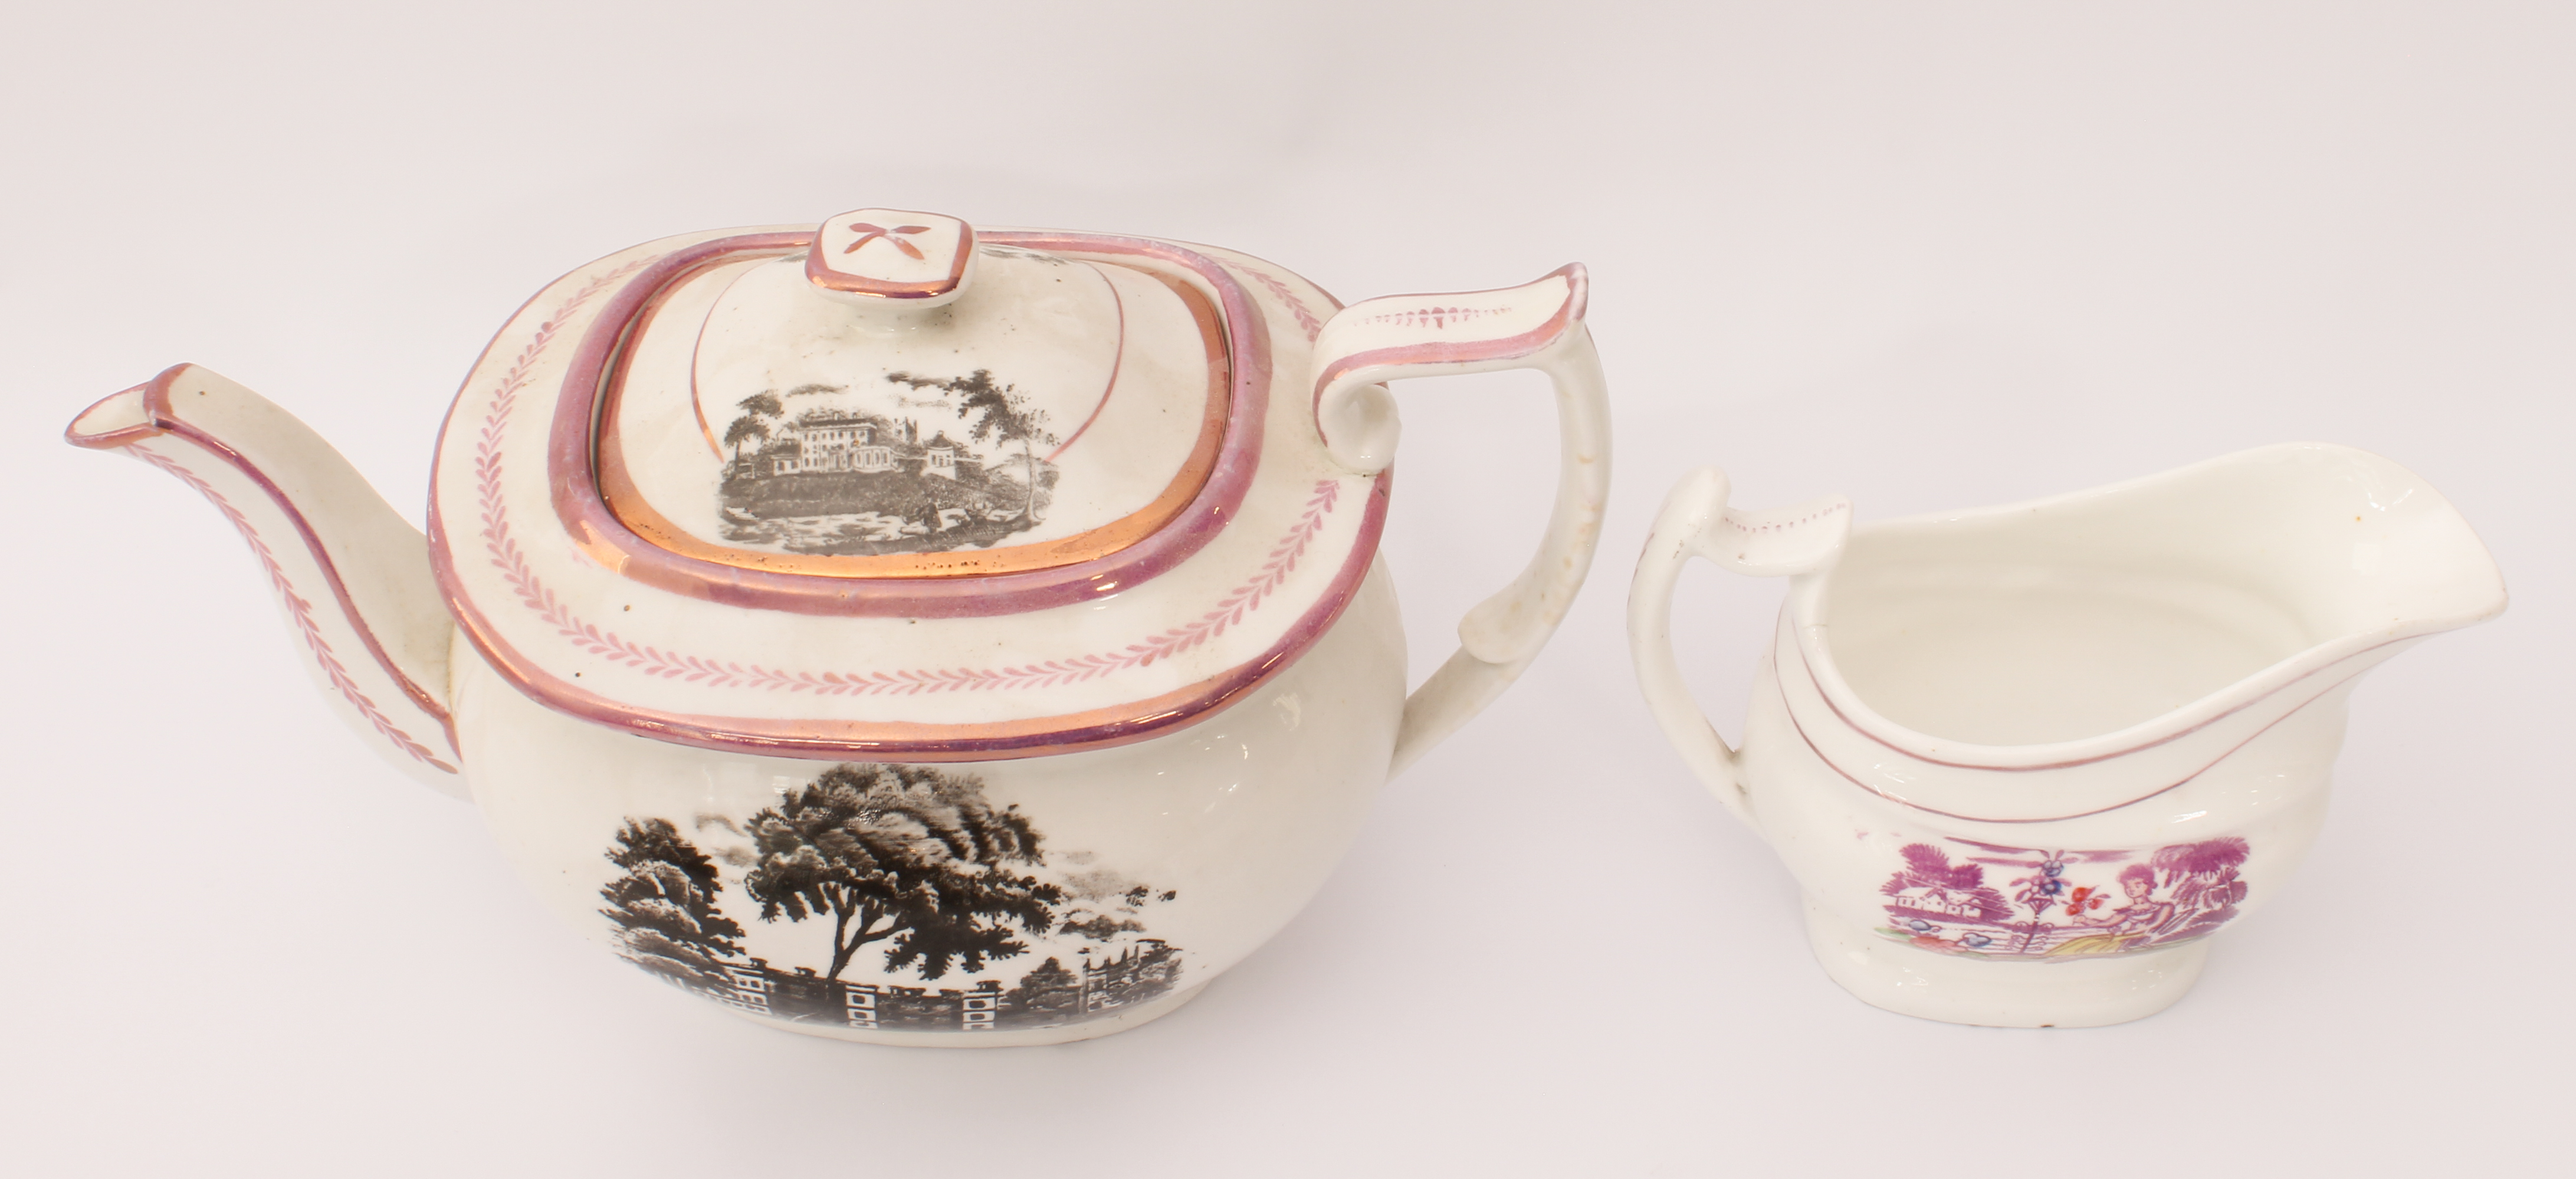 A 19th century silver-shaped Sunderland lustreware teapot - transfer decorated with figures in the - Image 4 of 4